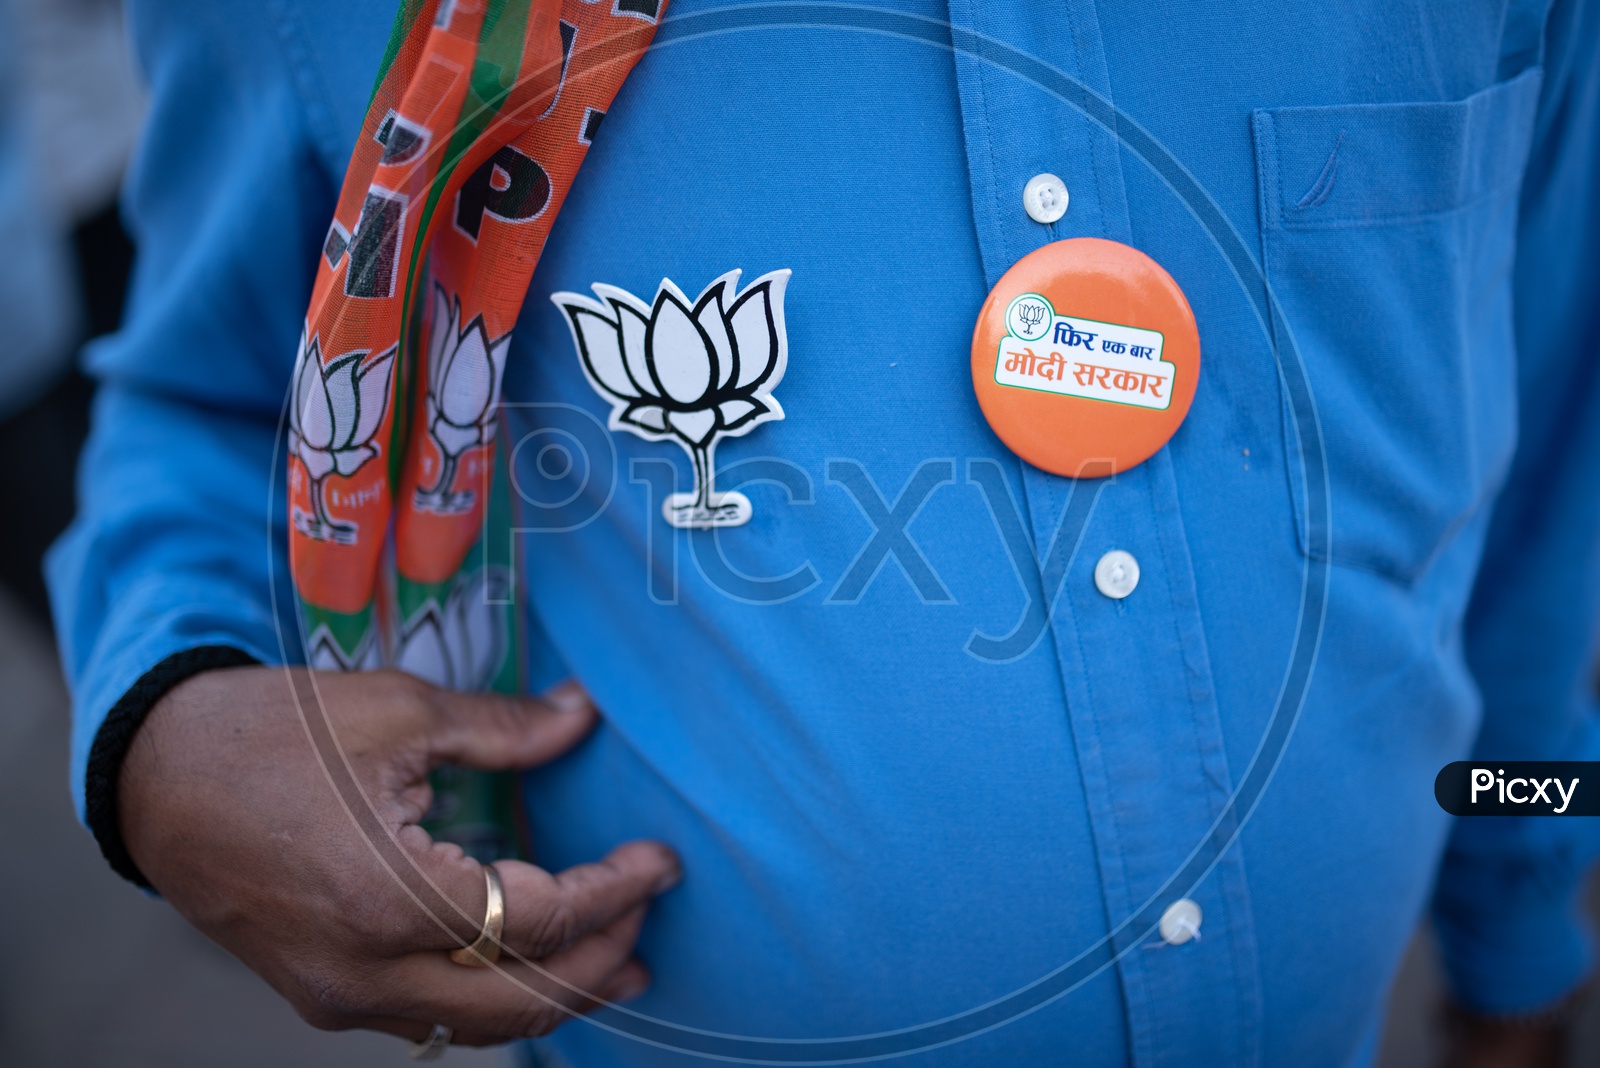 Modi Supporters Wearing BJP Party Flags And Lotus Symbol Badges During The Election Campaign For Lak Sabha General Elections 2019